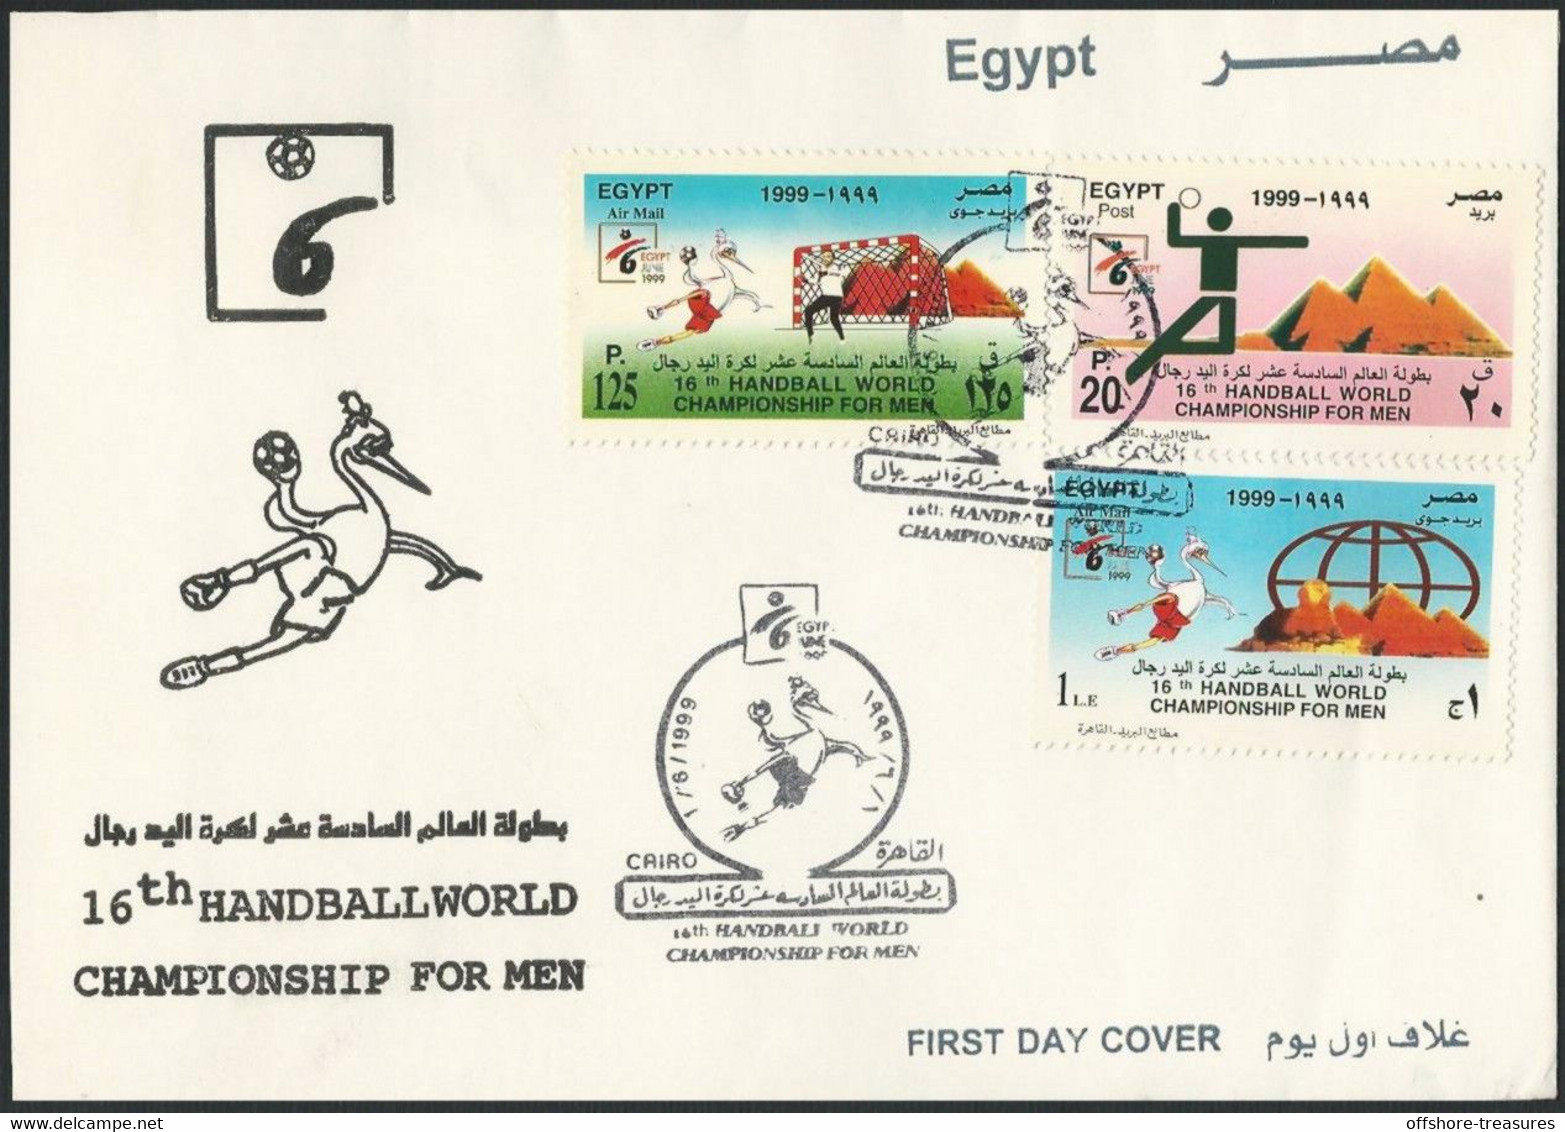 EGYPT Printing Error Variety FDC 1999 16th Handball World Champion Ship Men - FIRST DAY COVER- RED COLOR Missing In LOGO - Covers & Documents